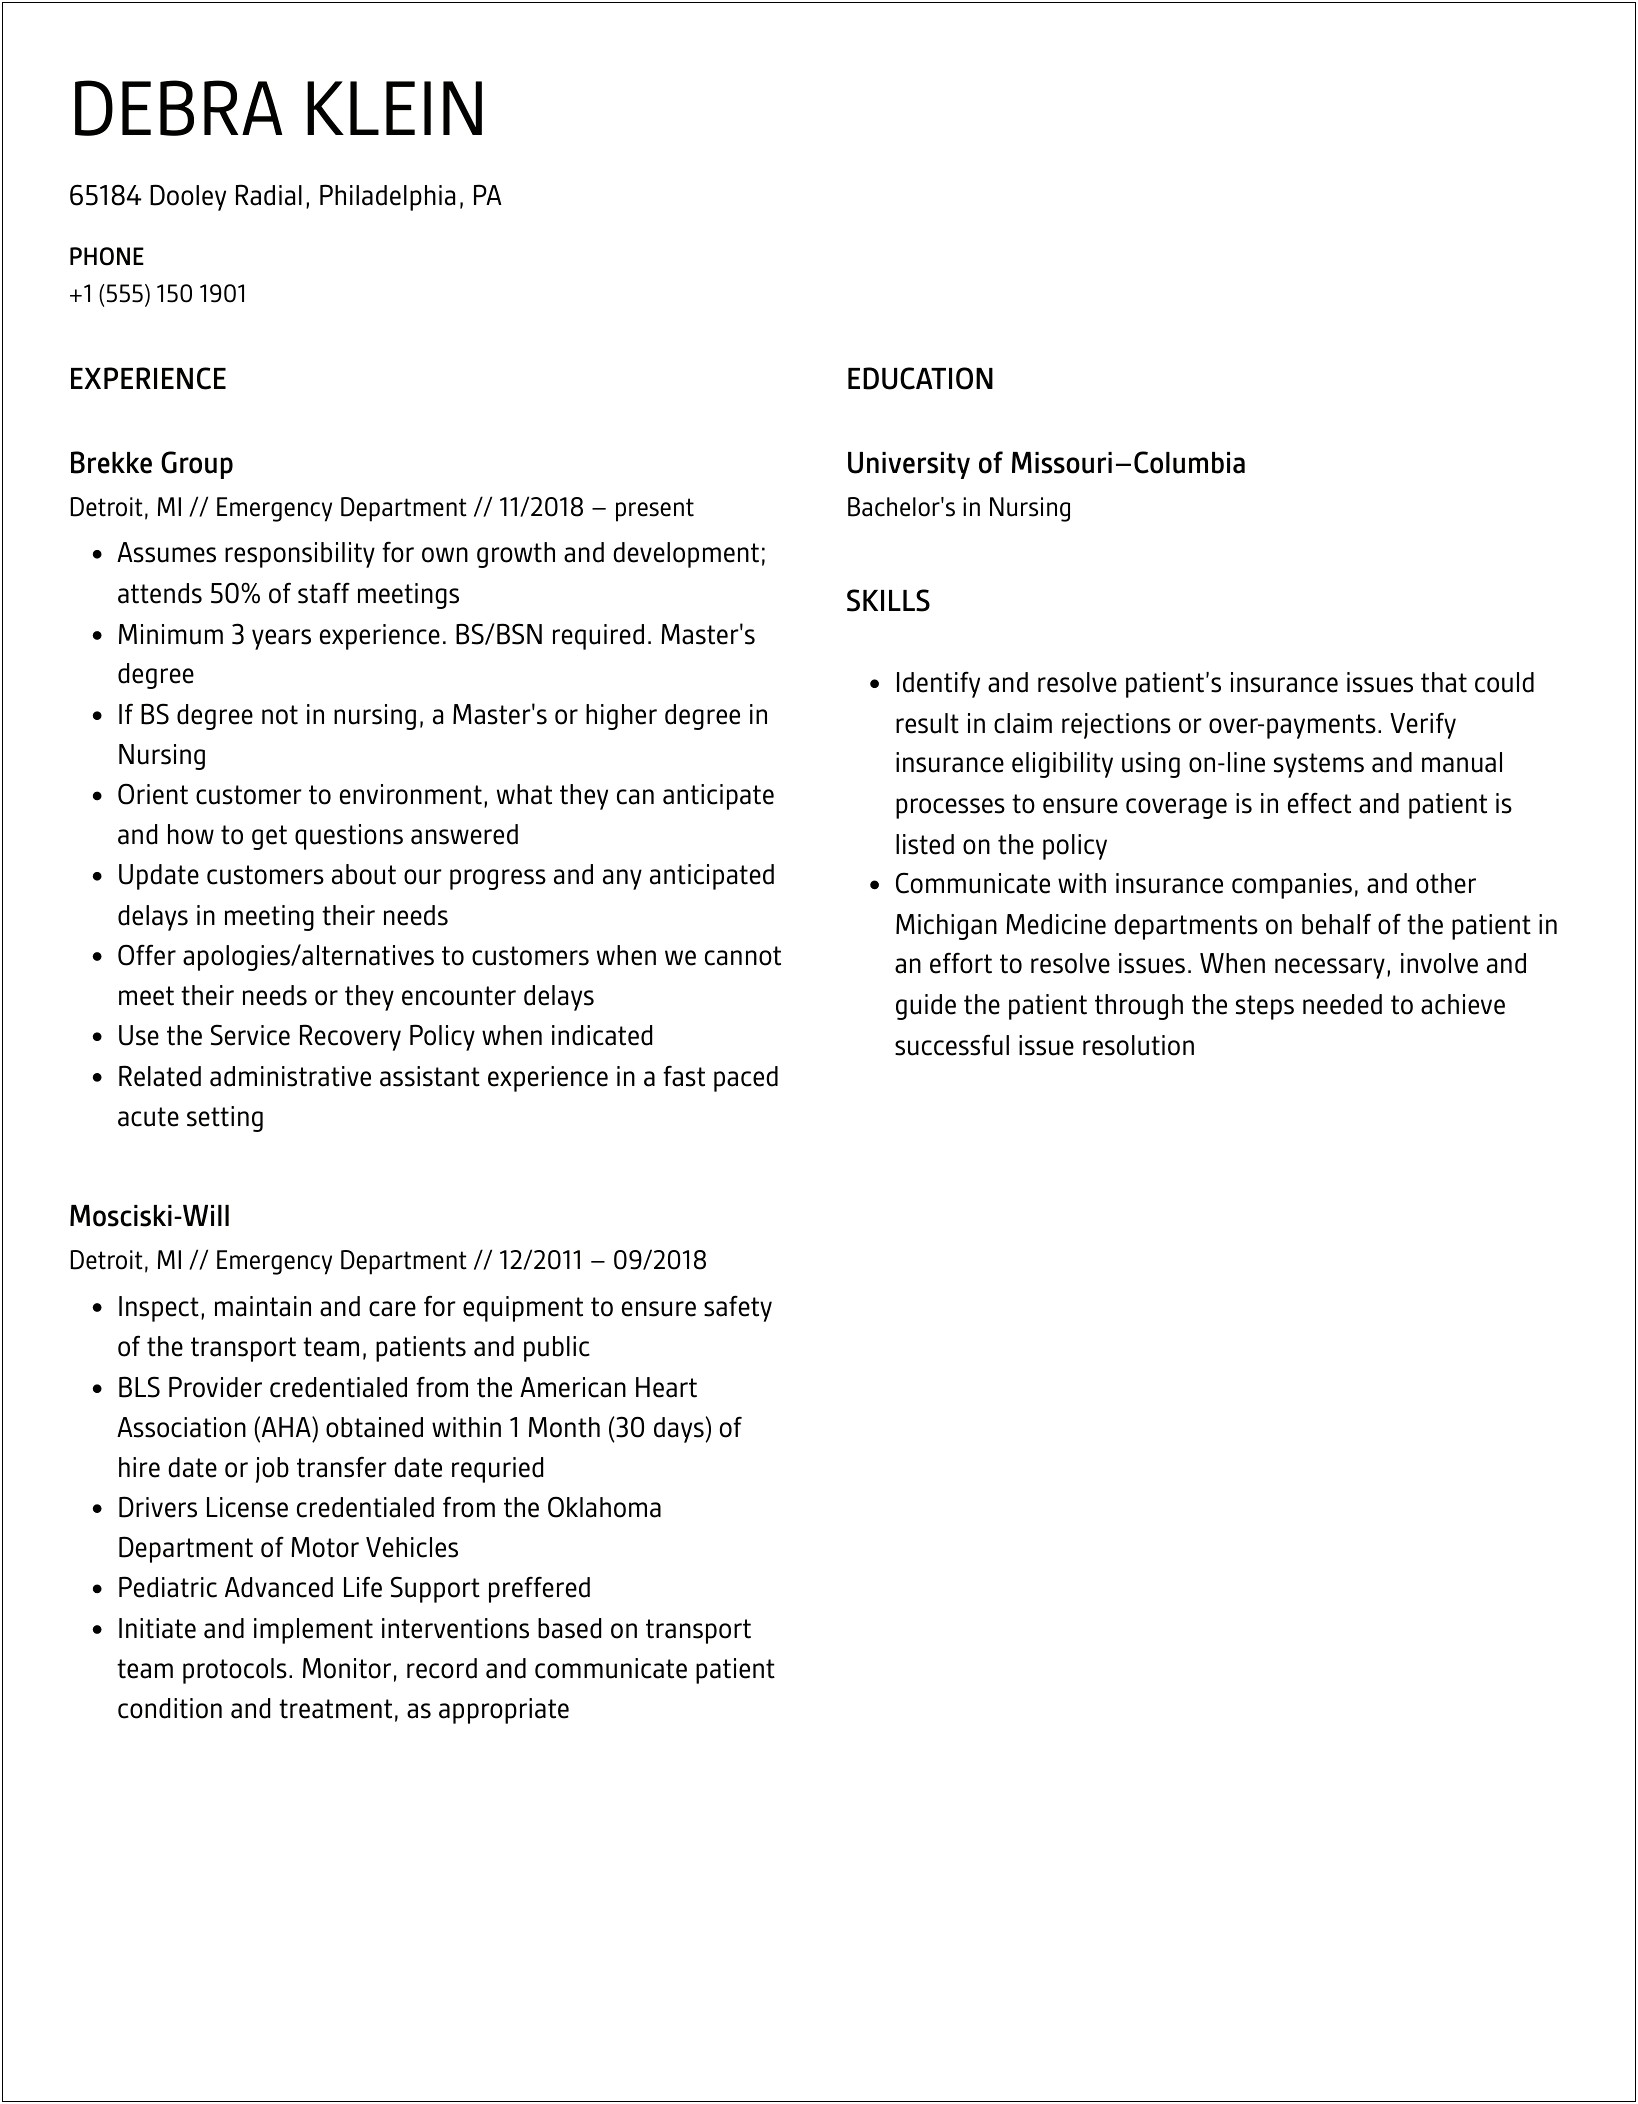 Highlhgint Emergency Medicine Experience On Resume Pa